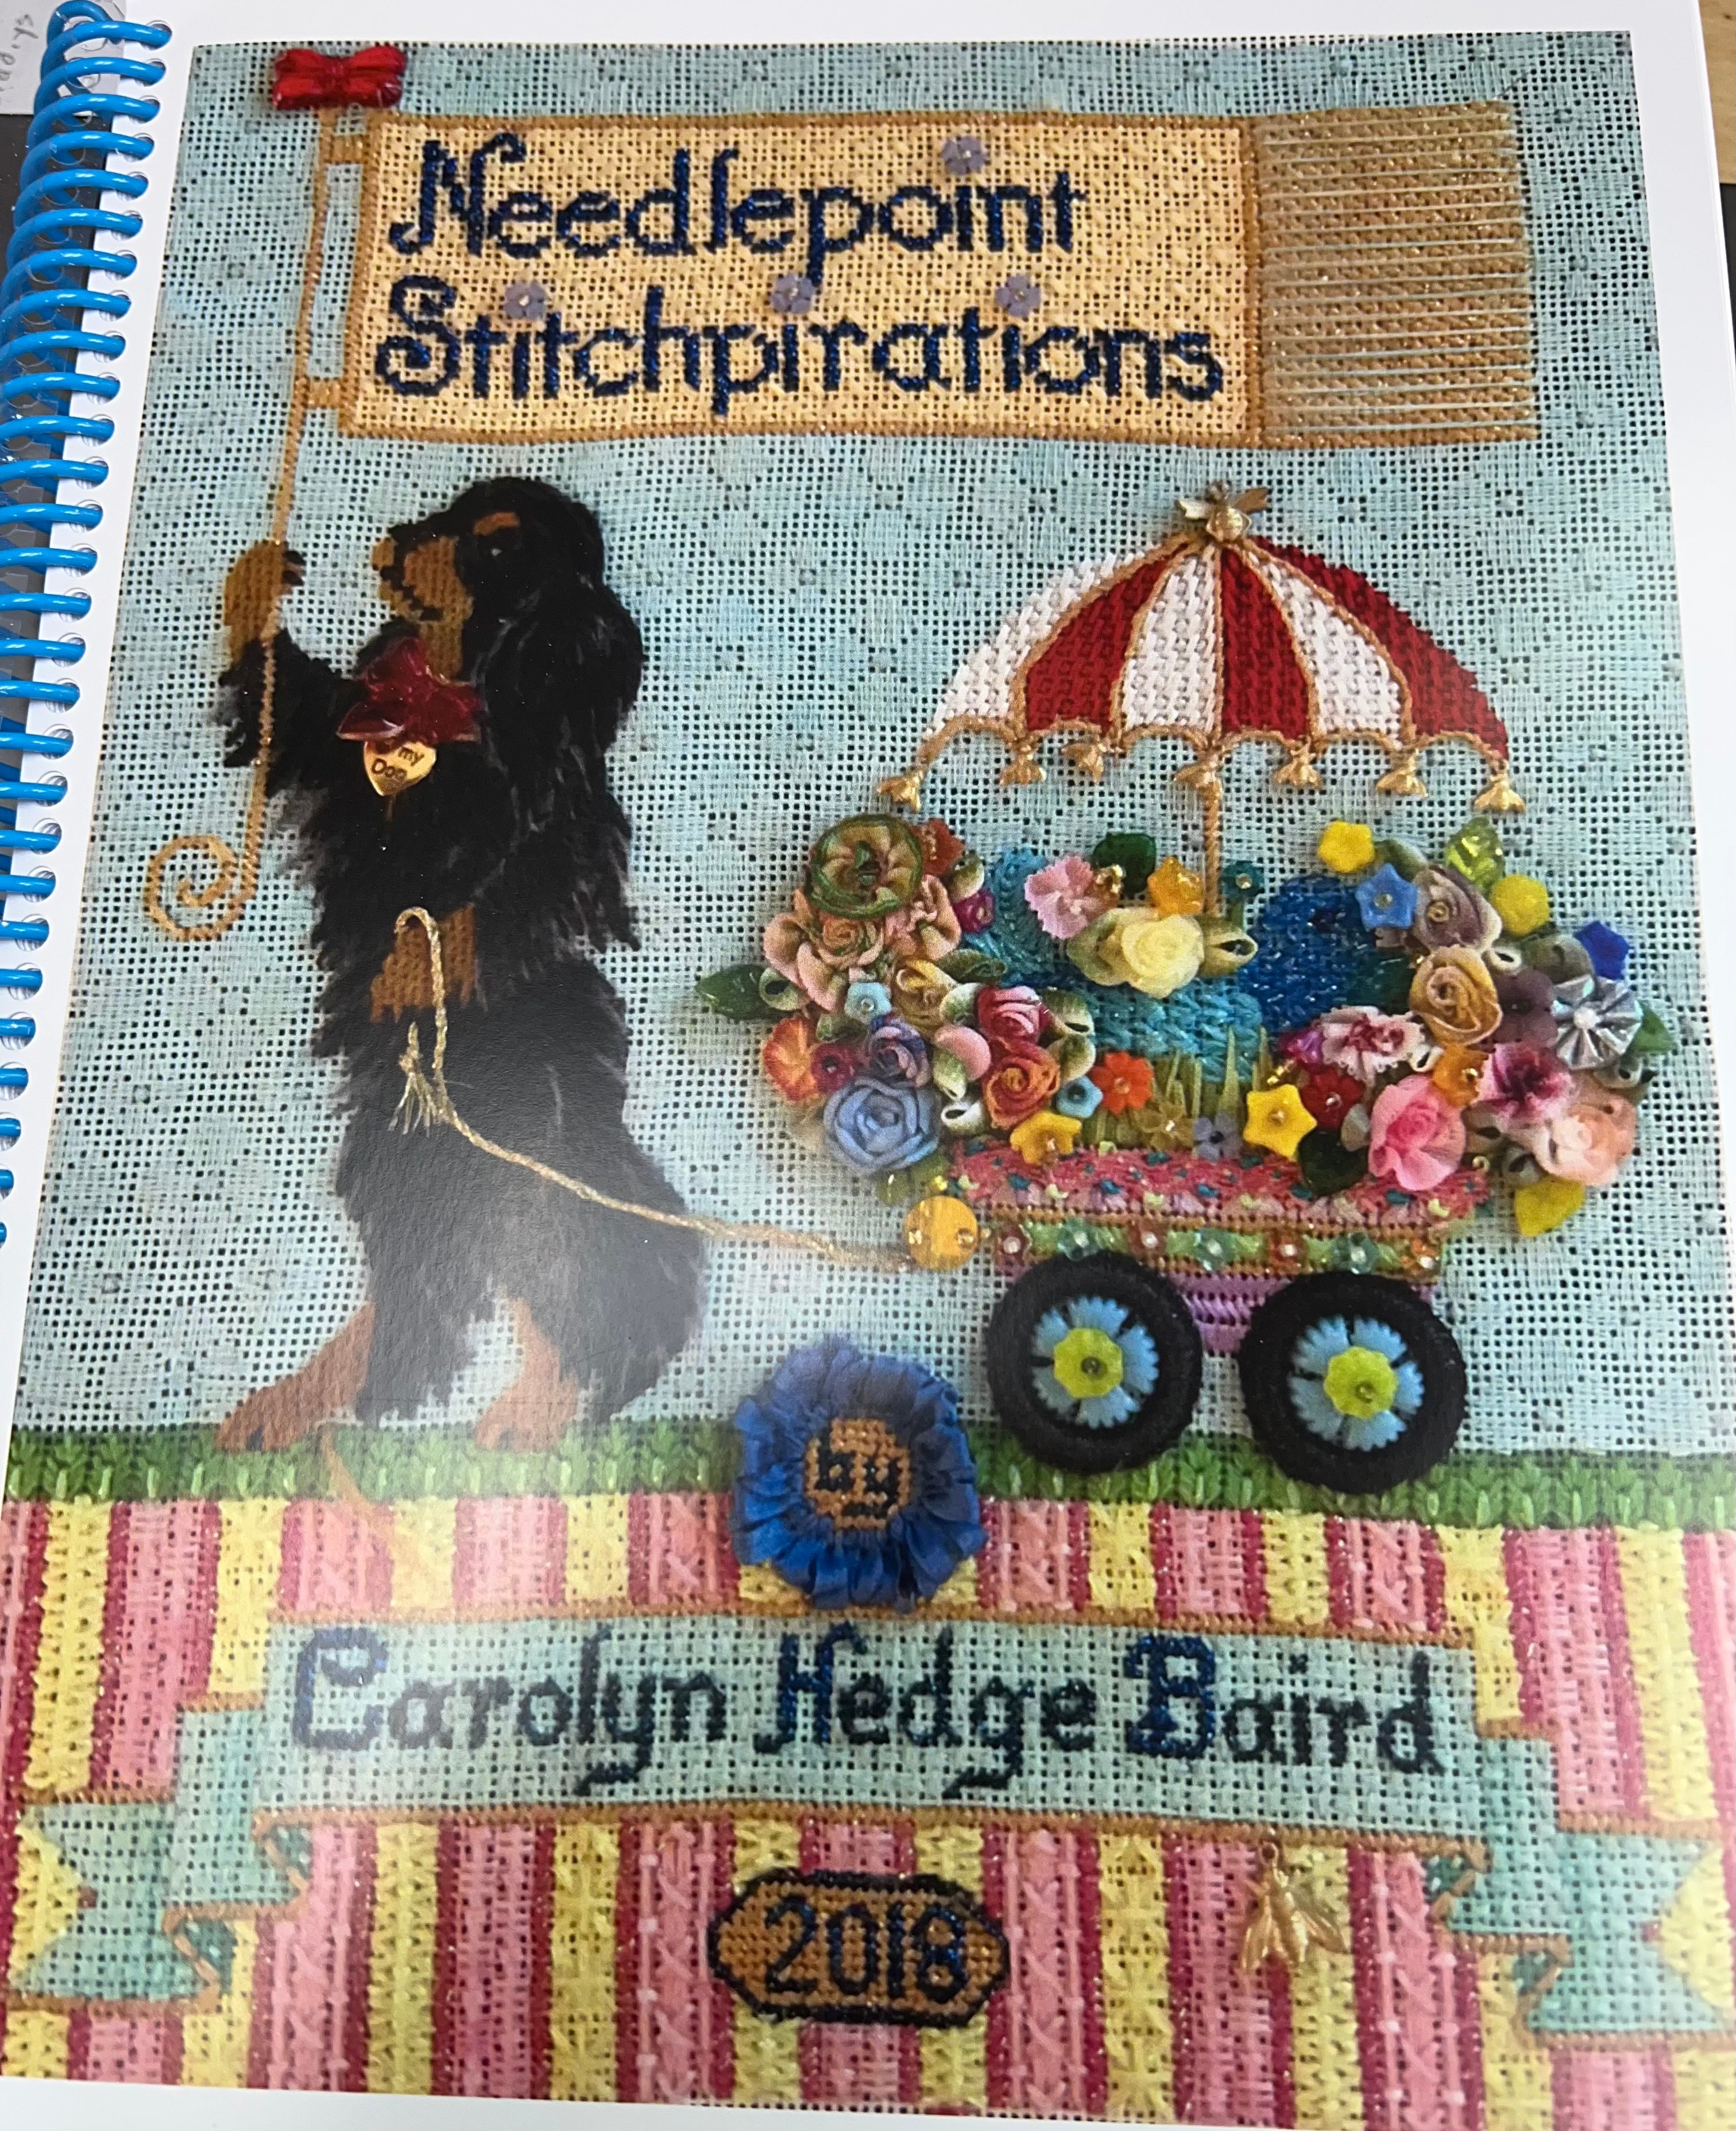 Needlepoint Stitchpirations by Carolyn Hedge Baird